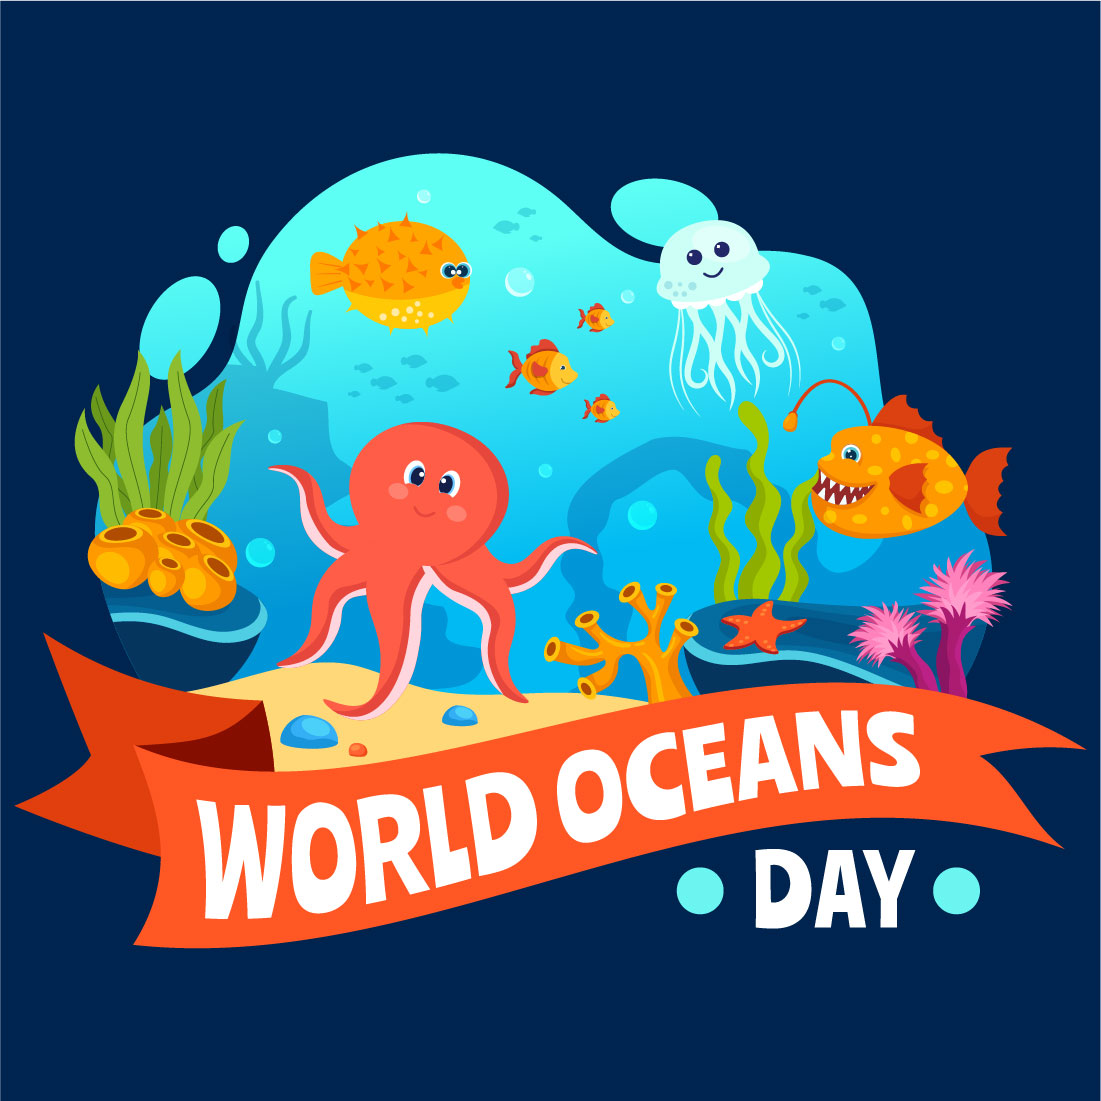 12 World Oceans Day Illustration preview image.